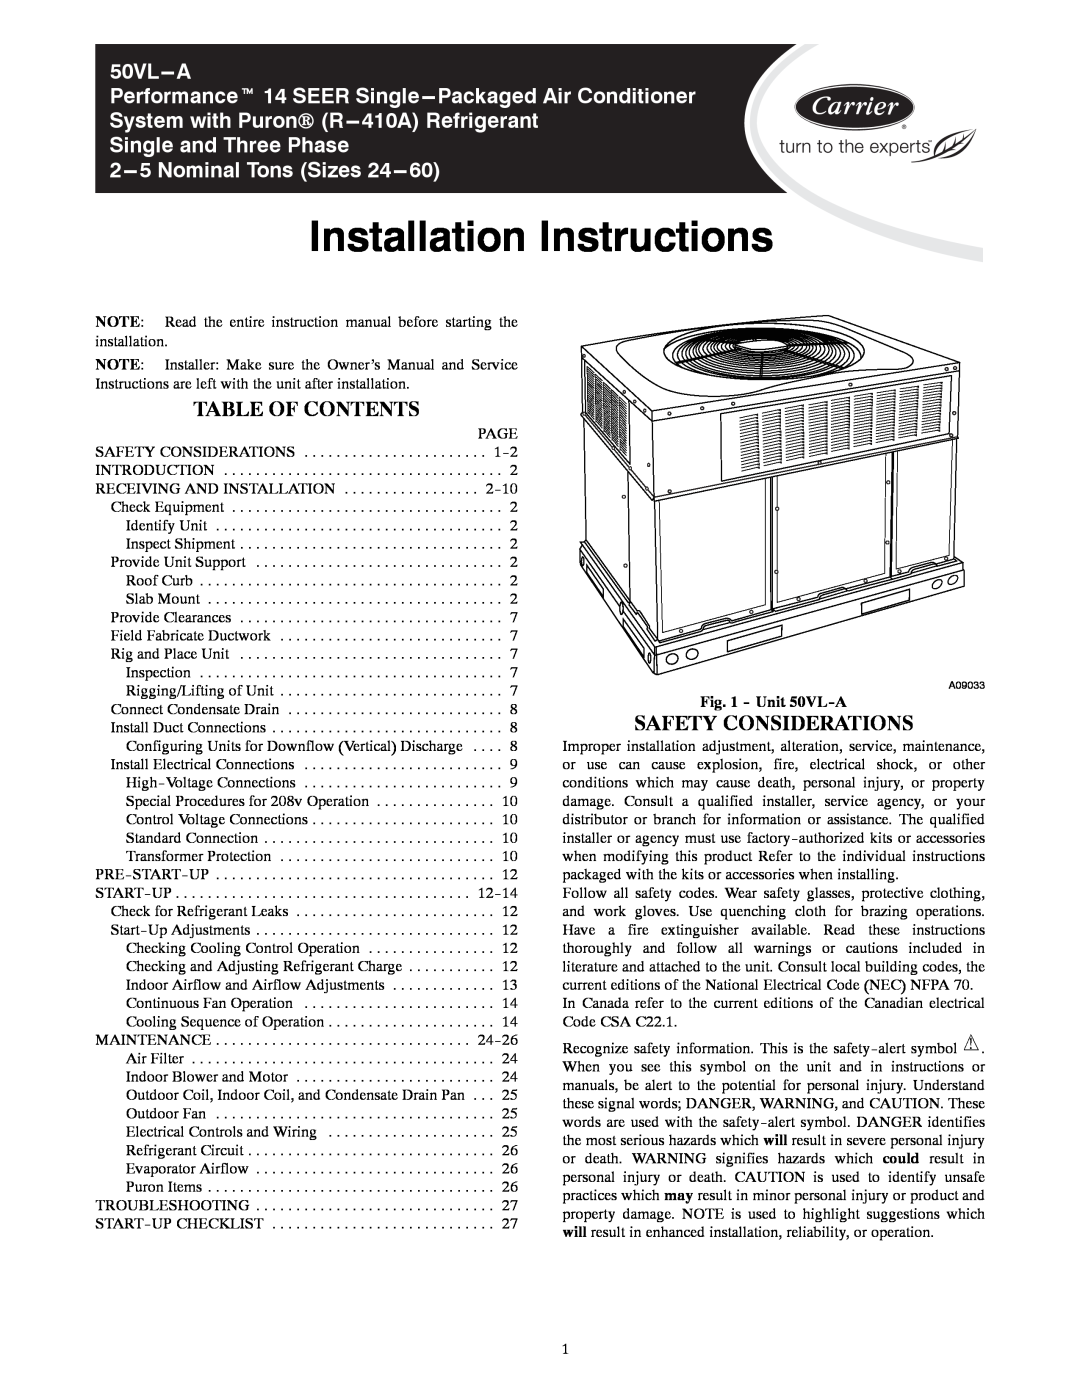 Carrier 50VL---A installation instructions Table Of Contents, Safety Considerations, Unit 50VL-A 